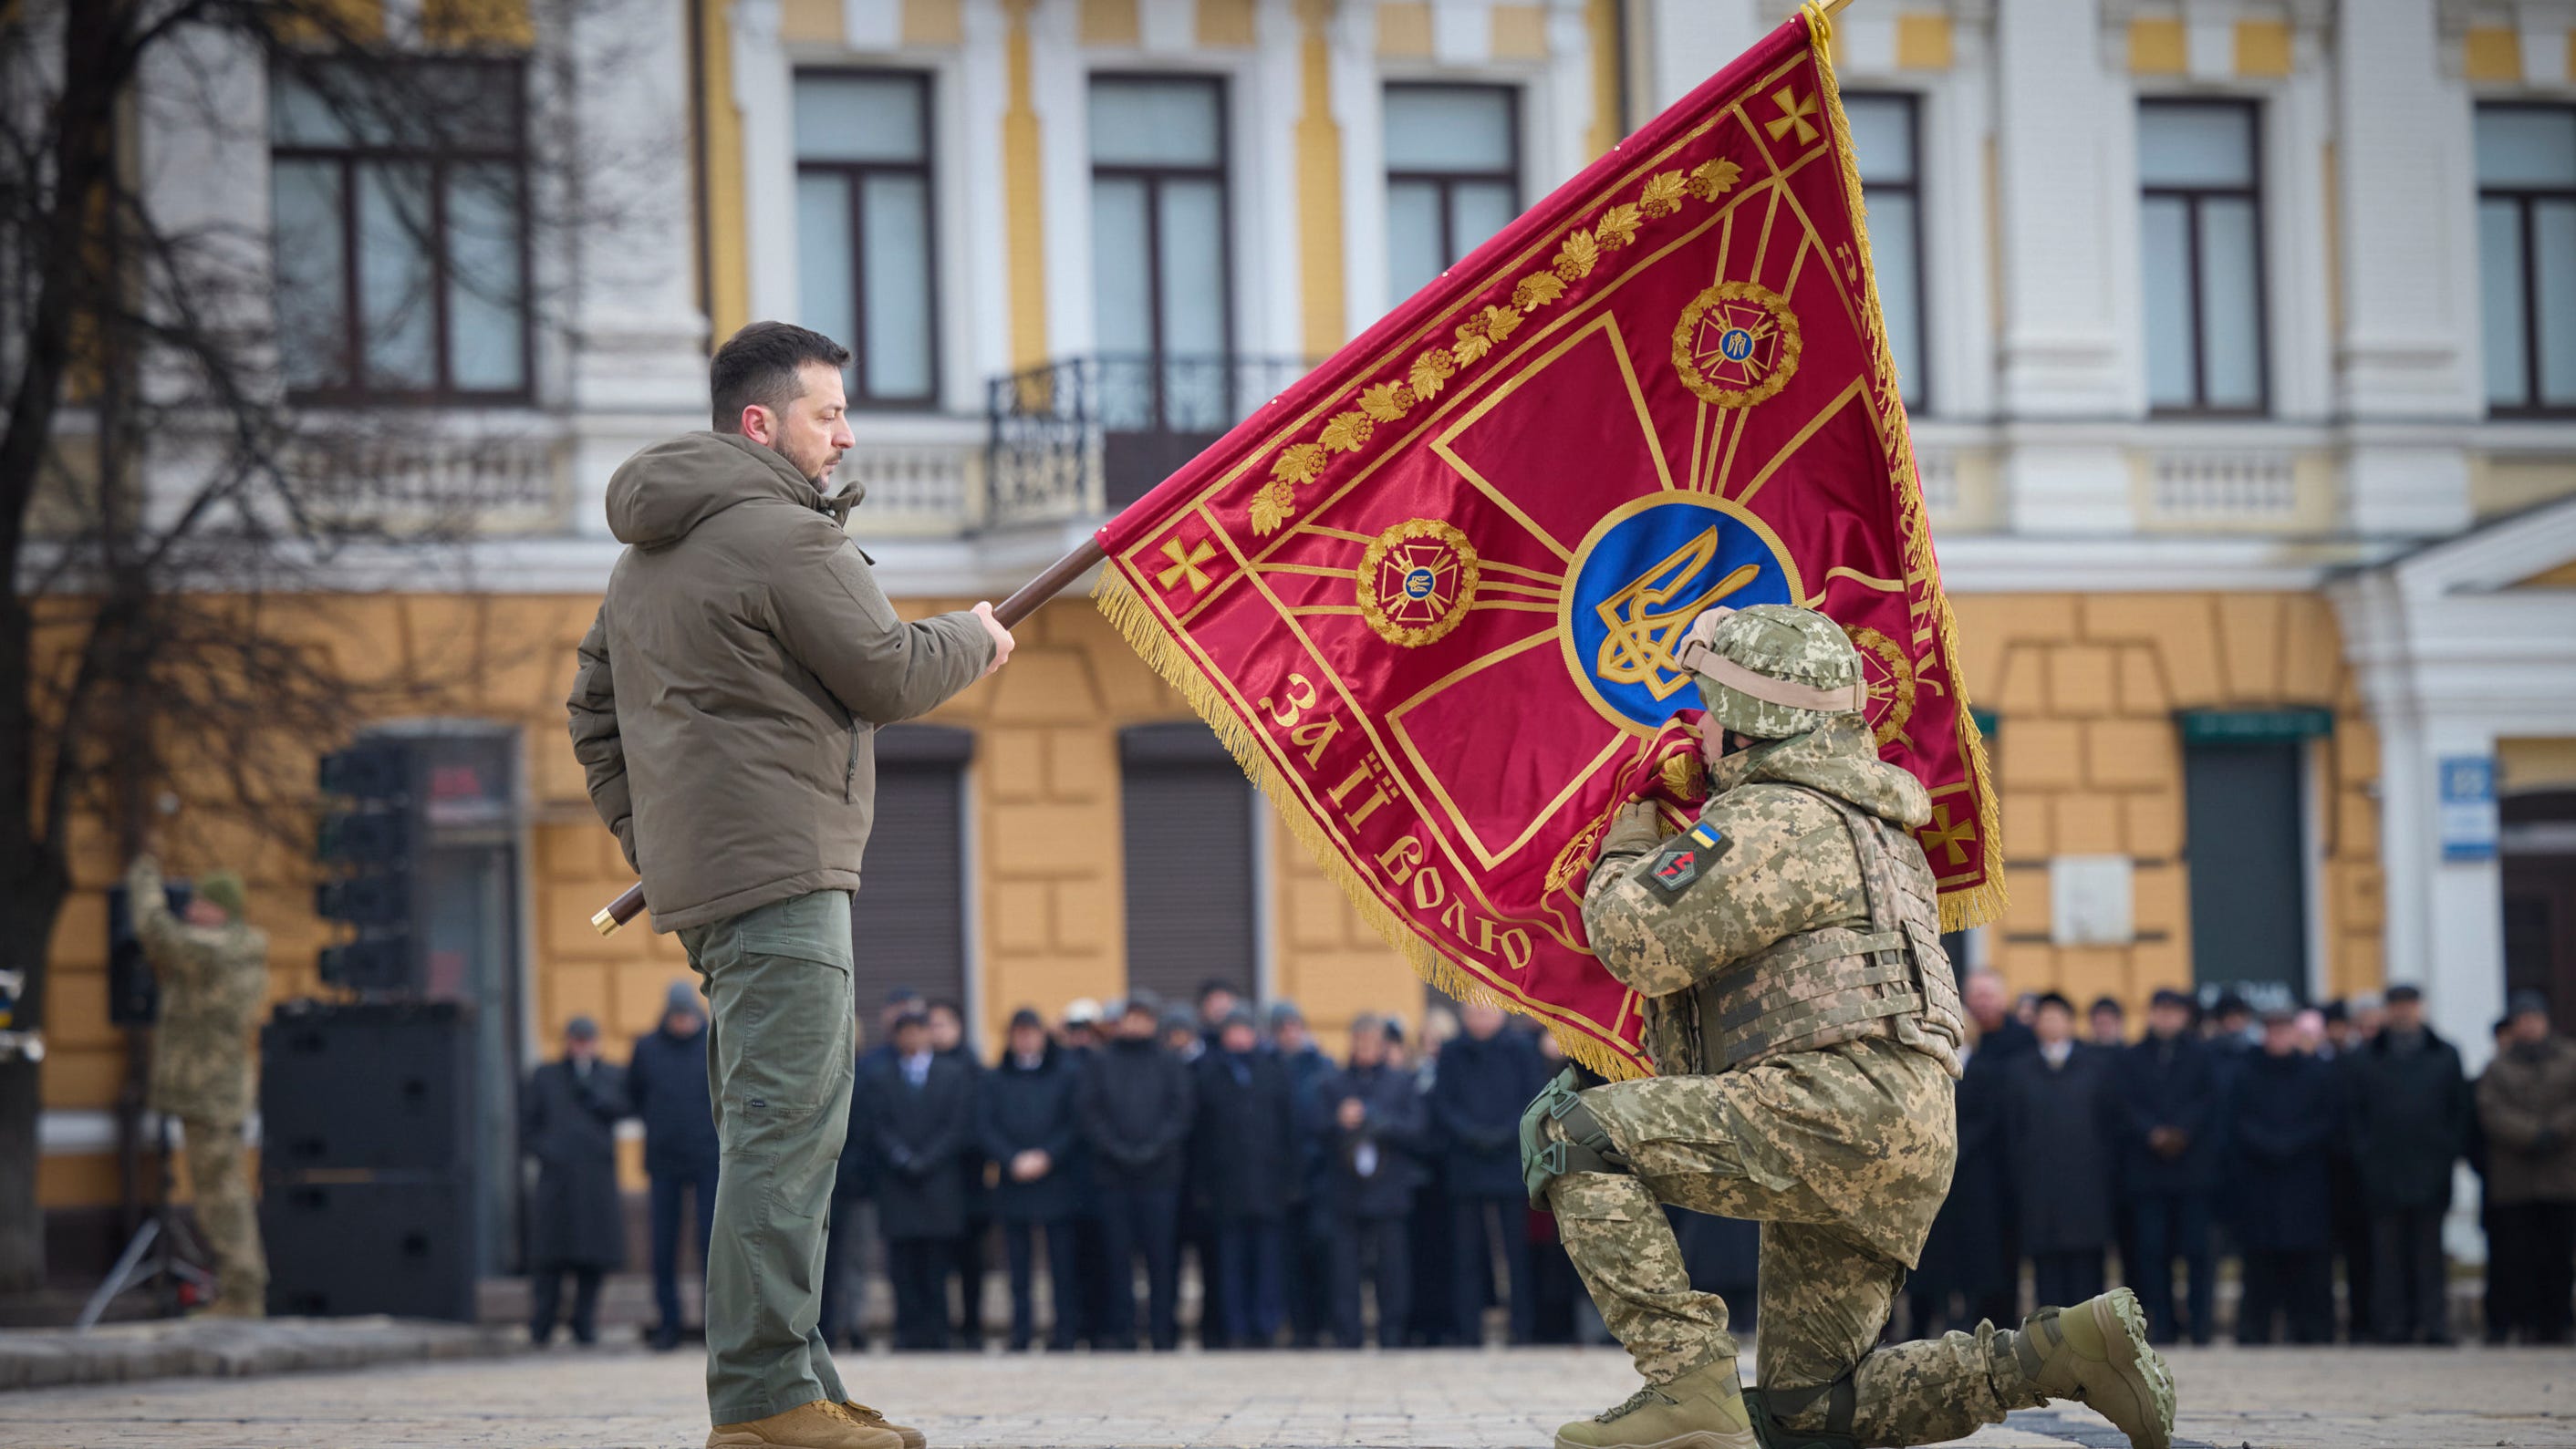 Ukrainian President Volodymyr Zelenskyy, left, holds the flag of a military unit as an officer kisses it, during commemorative event on the occasion of the Russia Ukraine war one year anniversary in Kyiv, Ukraine, Friday, Feb. 24, 2023.